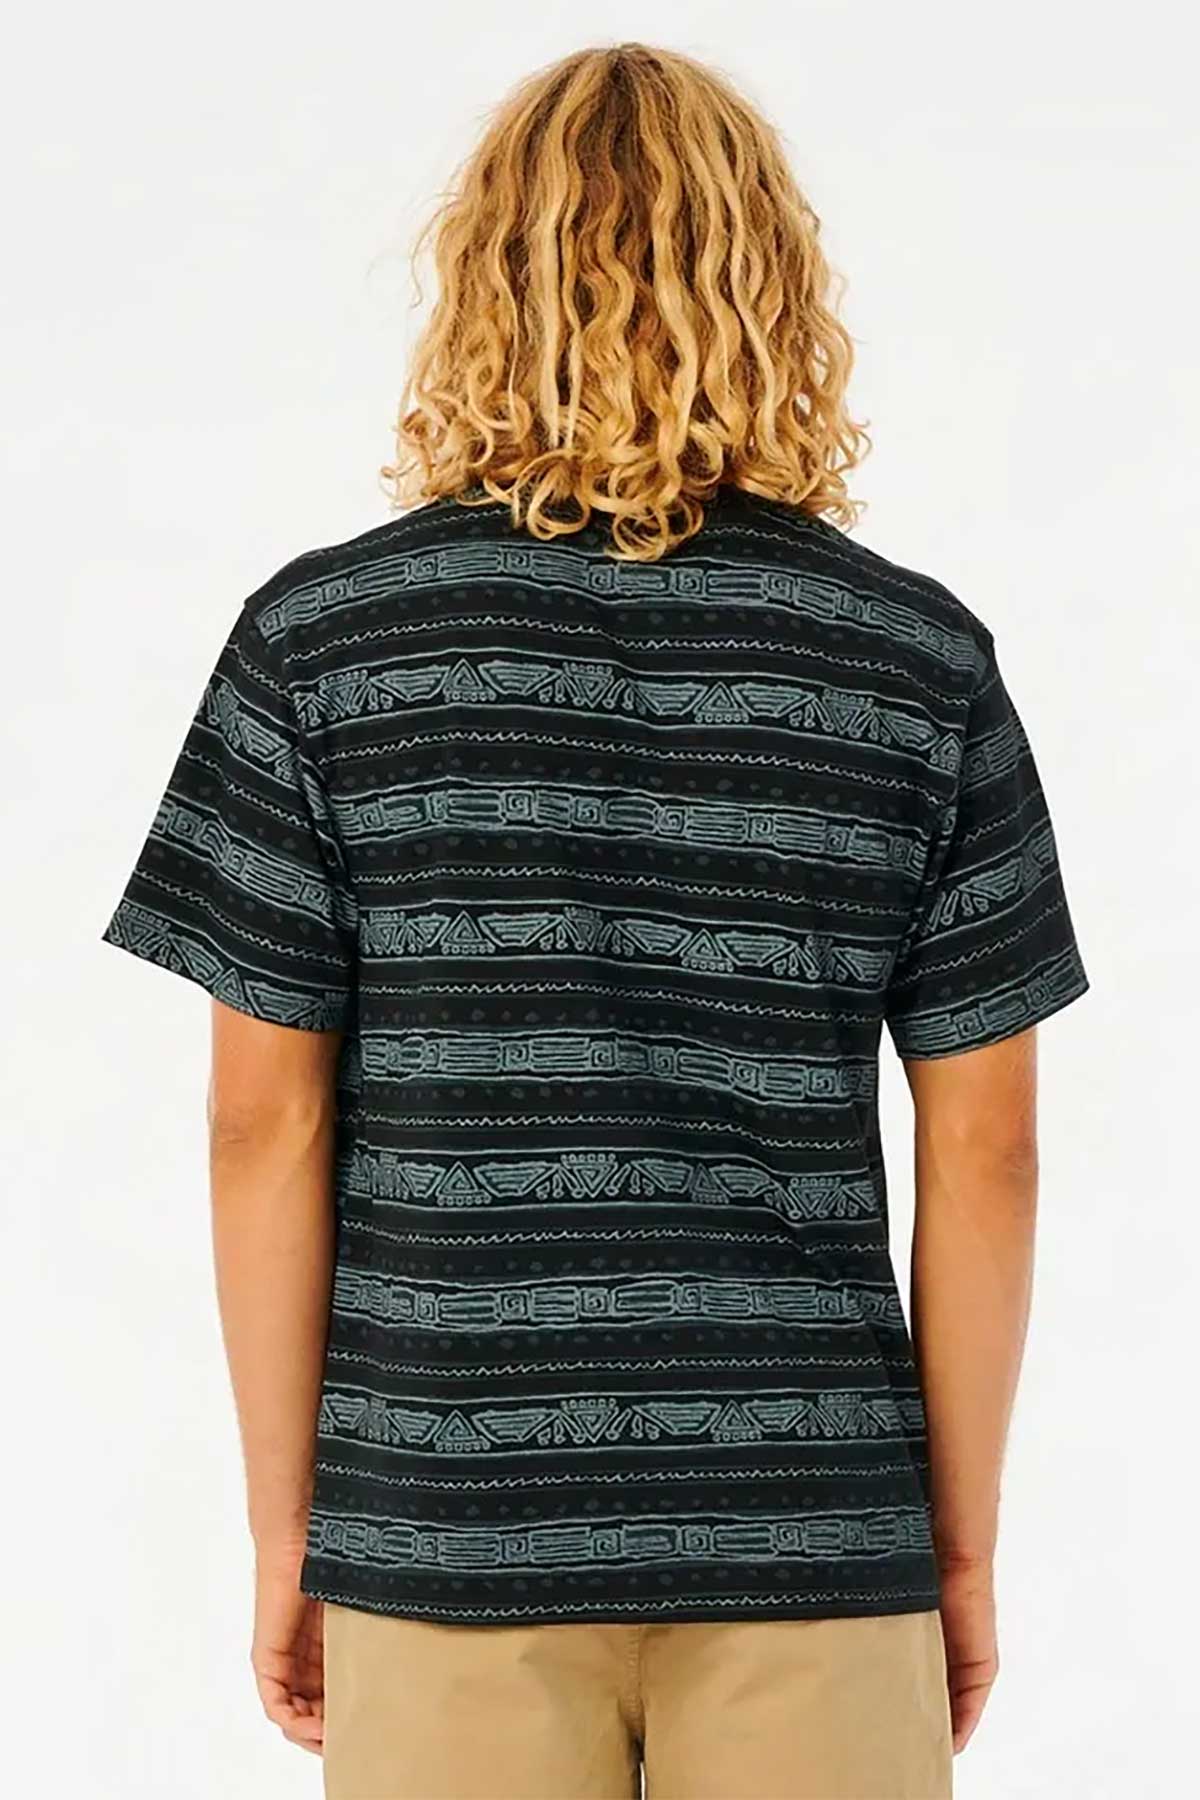 Rip Curl Boys Tee - Archive lost tracks